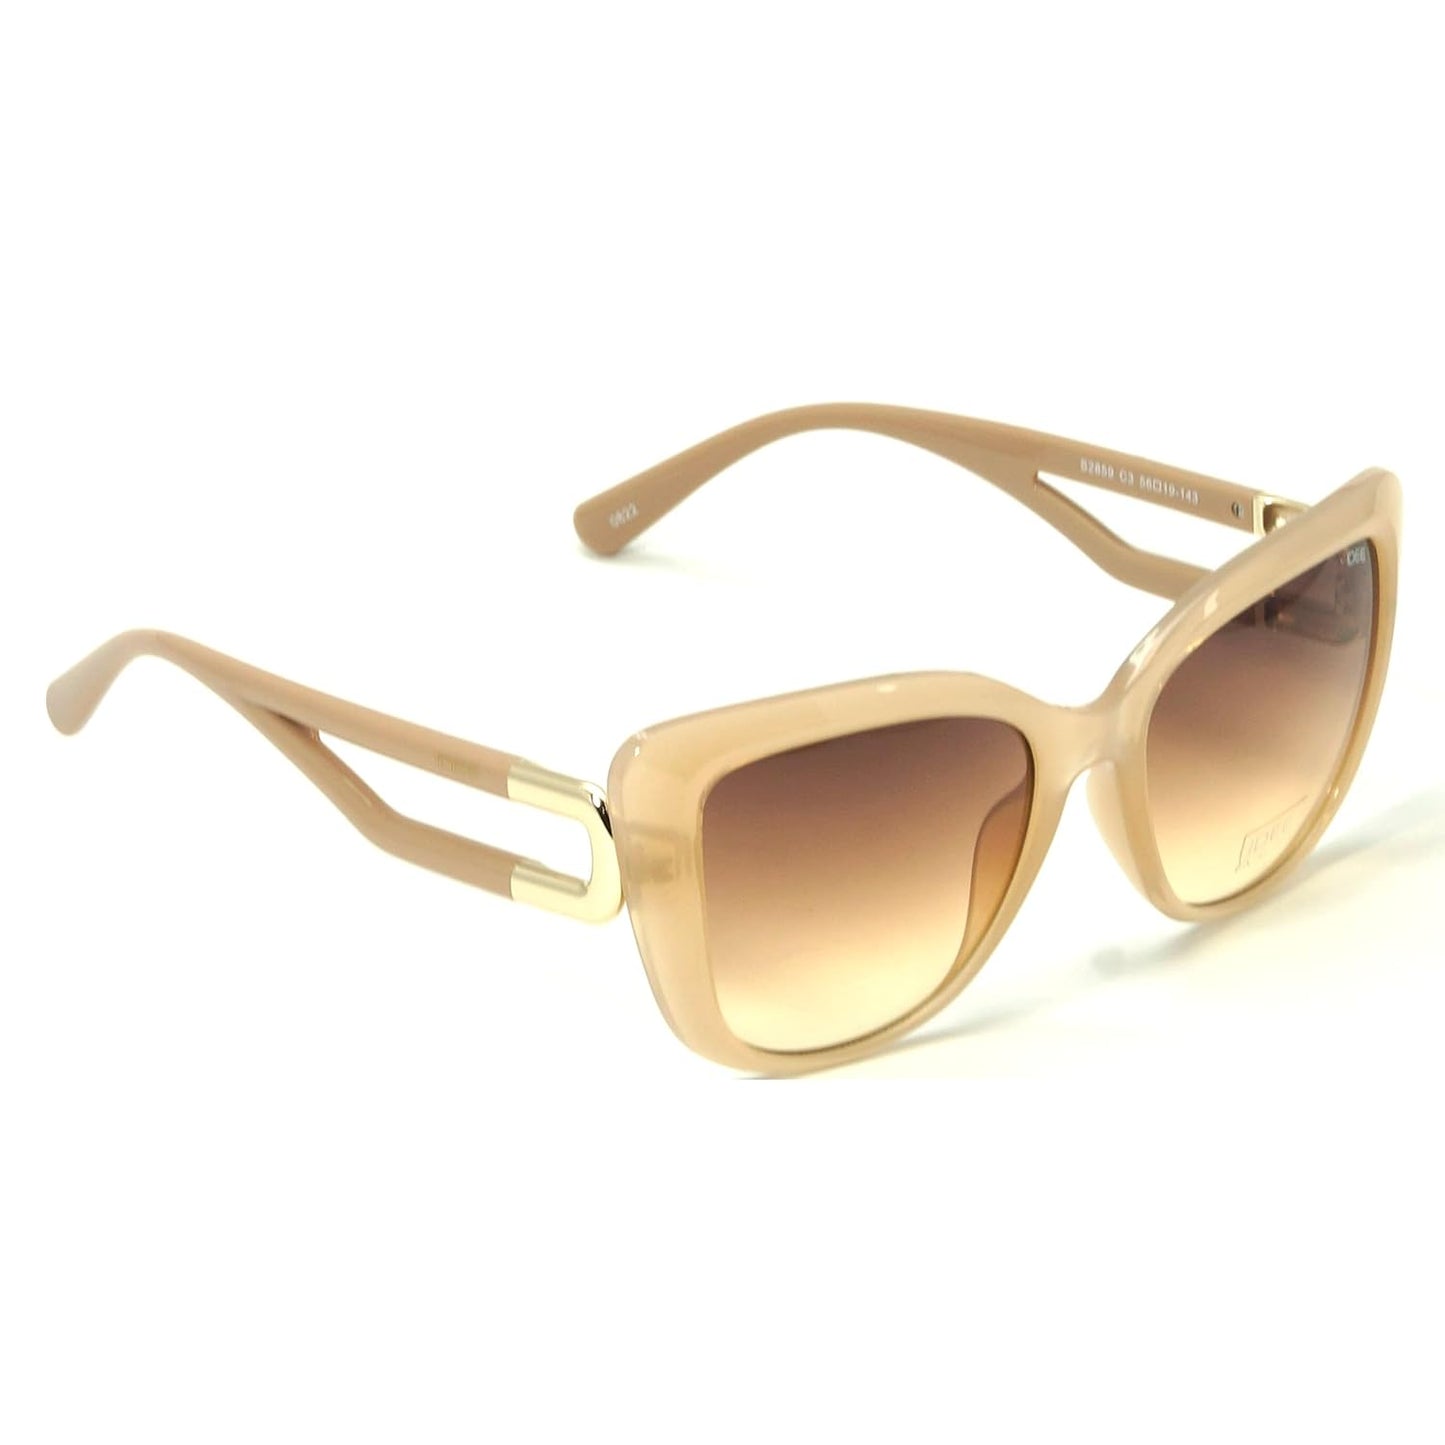 IDEE Butterfly sunglasses IDEE-S2859-C3 Large Light Brown sunglasses for Women